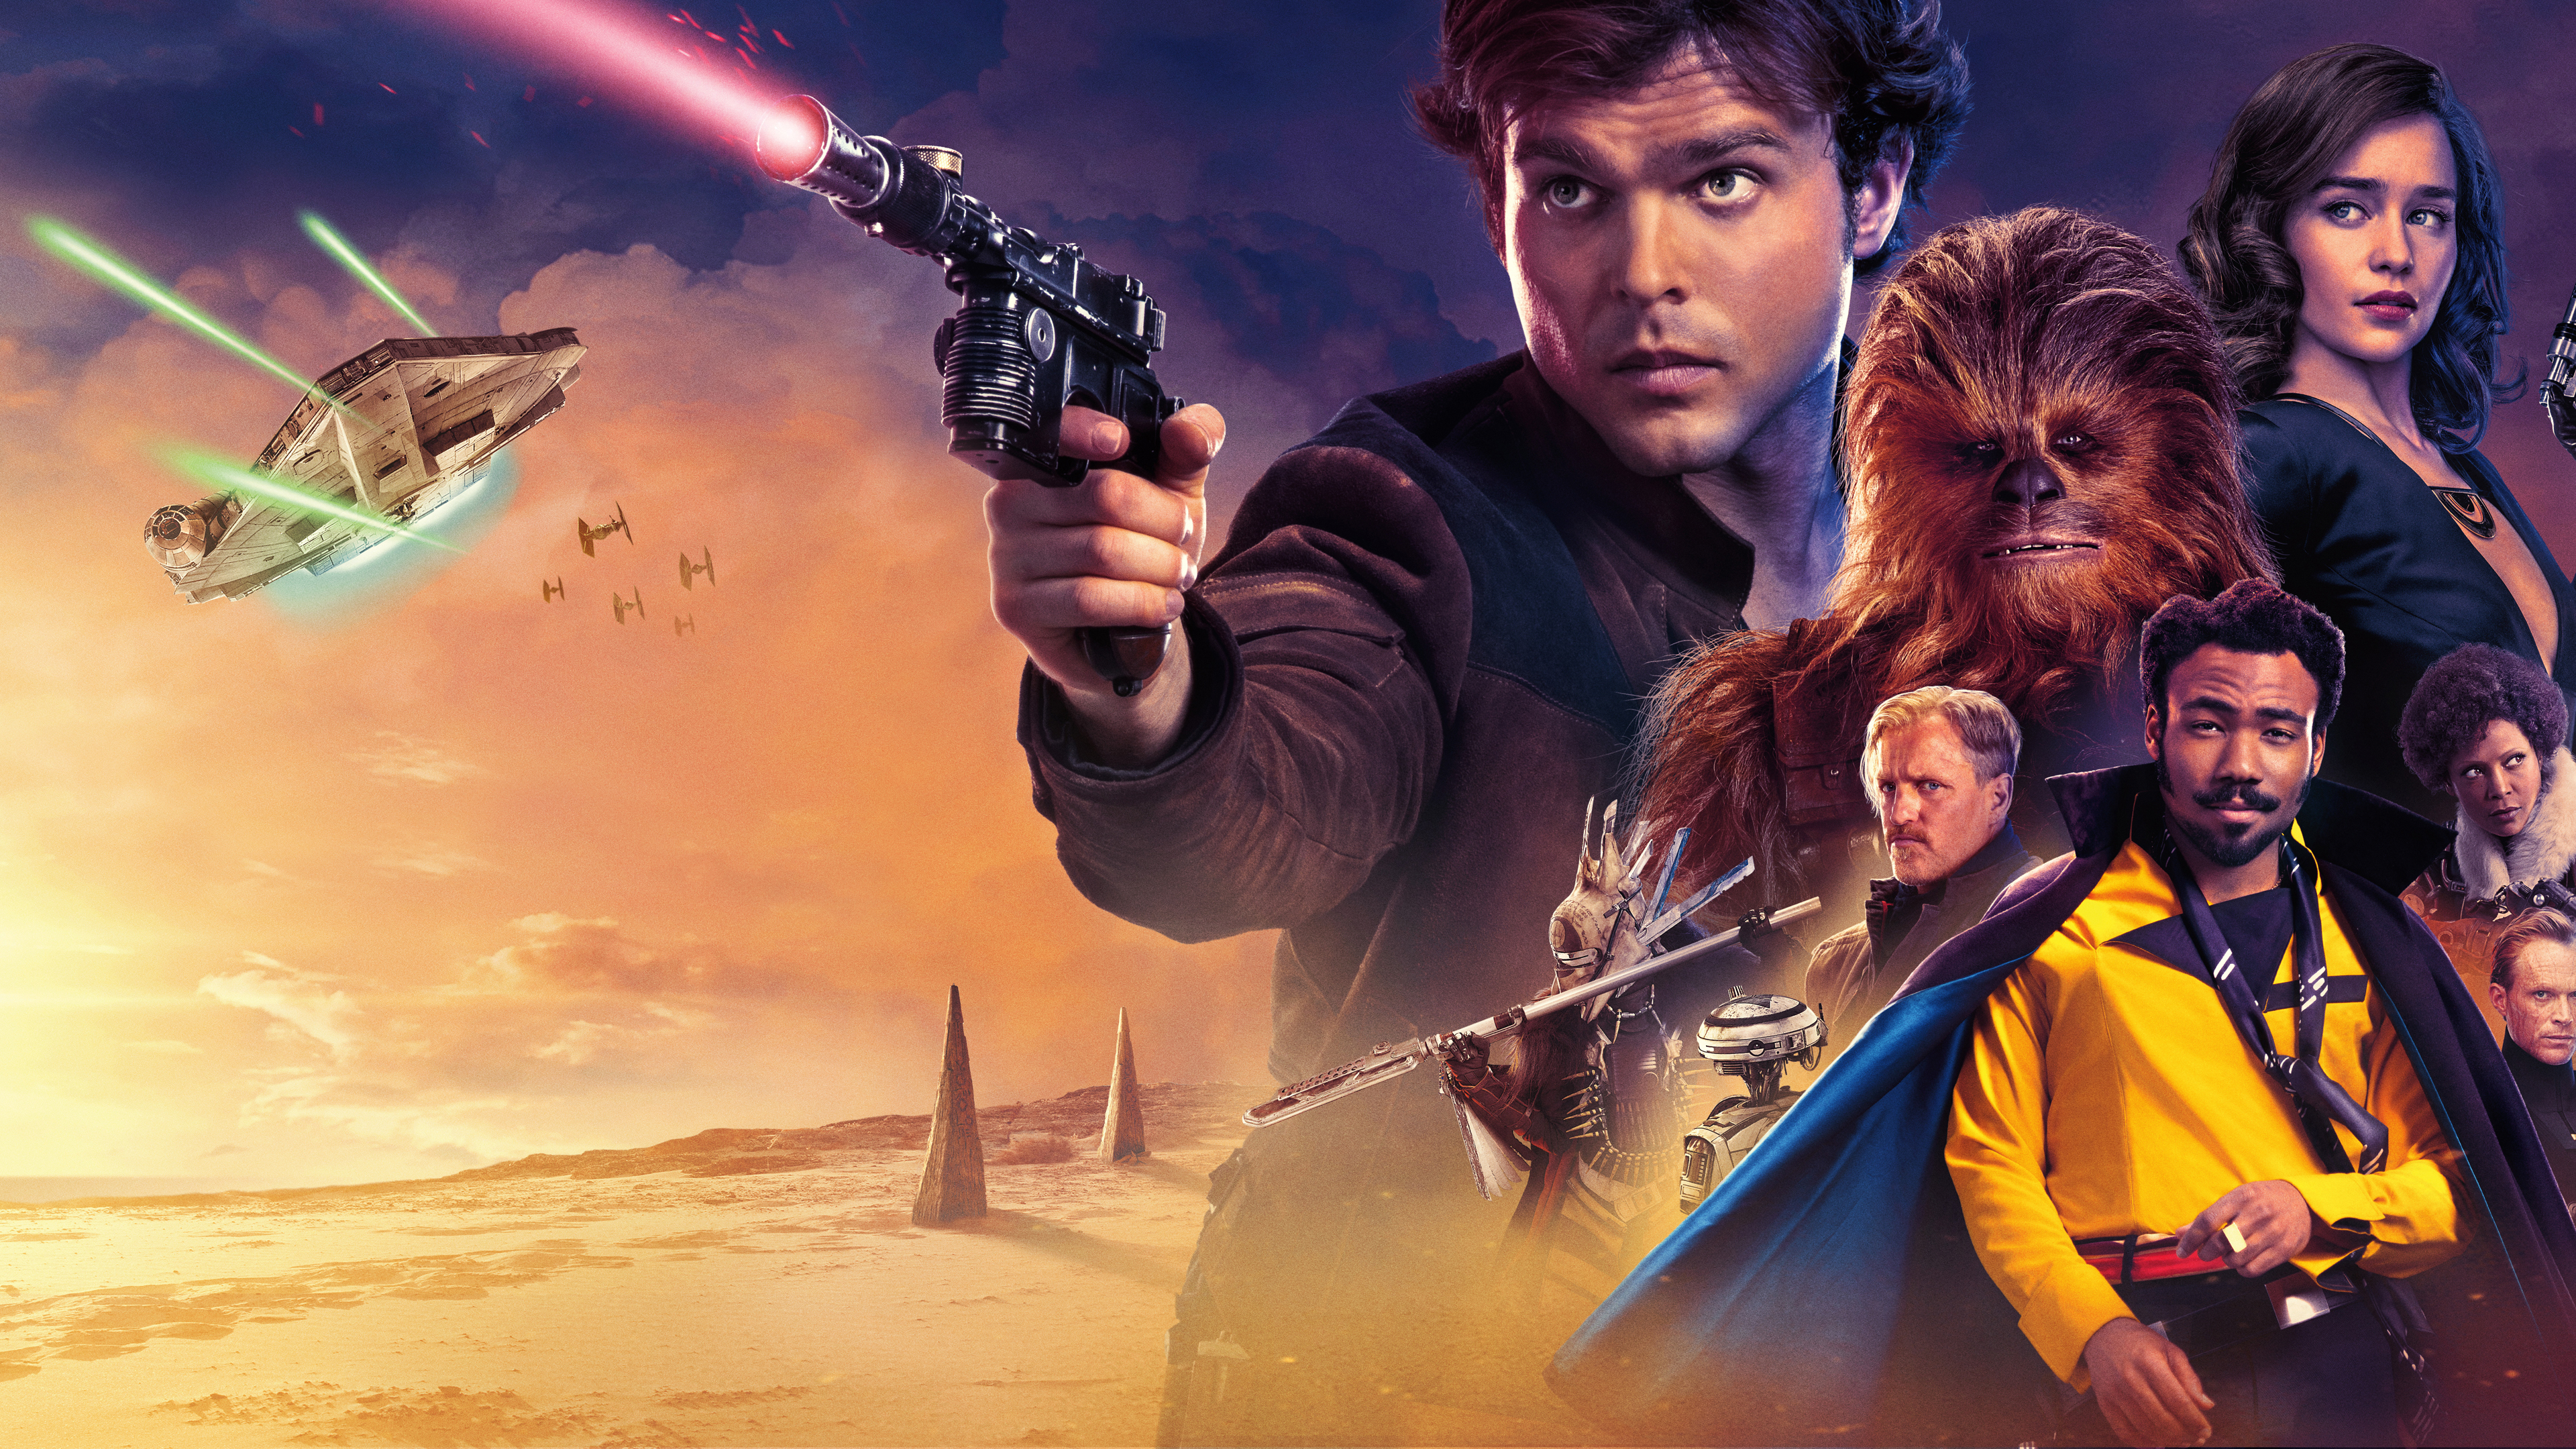 Movie Poster Action Movie Star Wars Han Solo Chewbacca Movies Actor Actress Solo A Star Wars Story 3840x2160